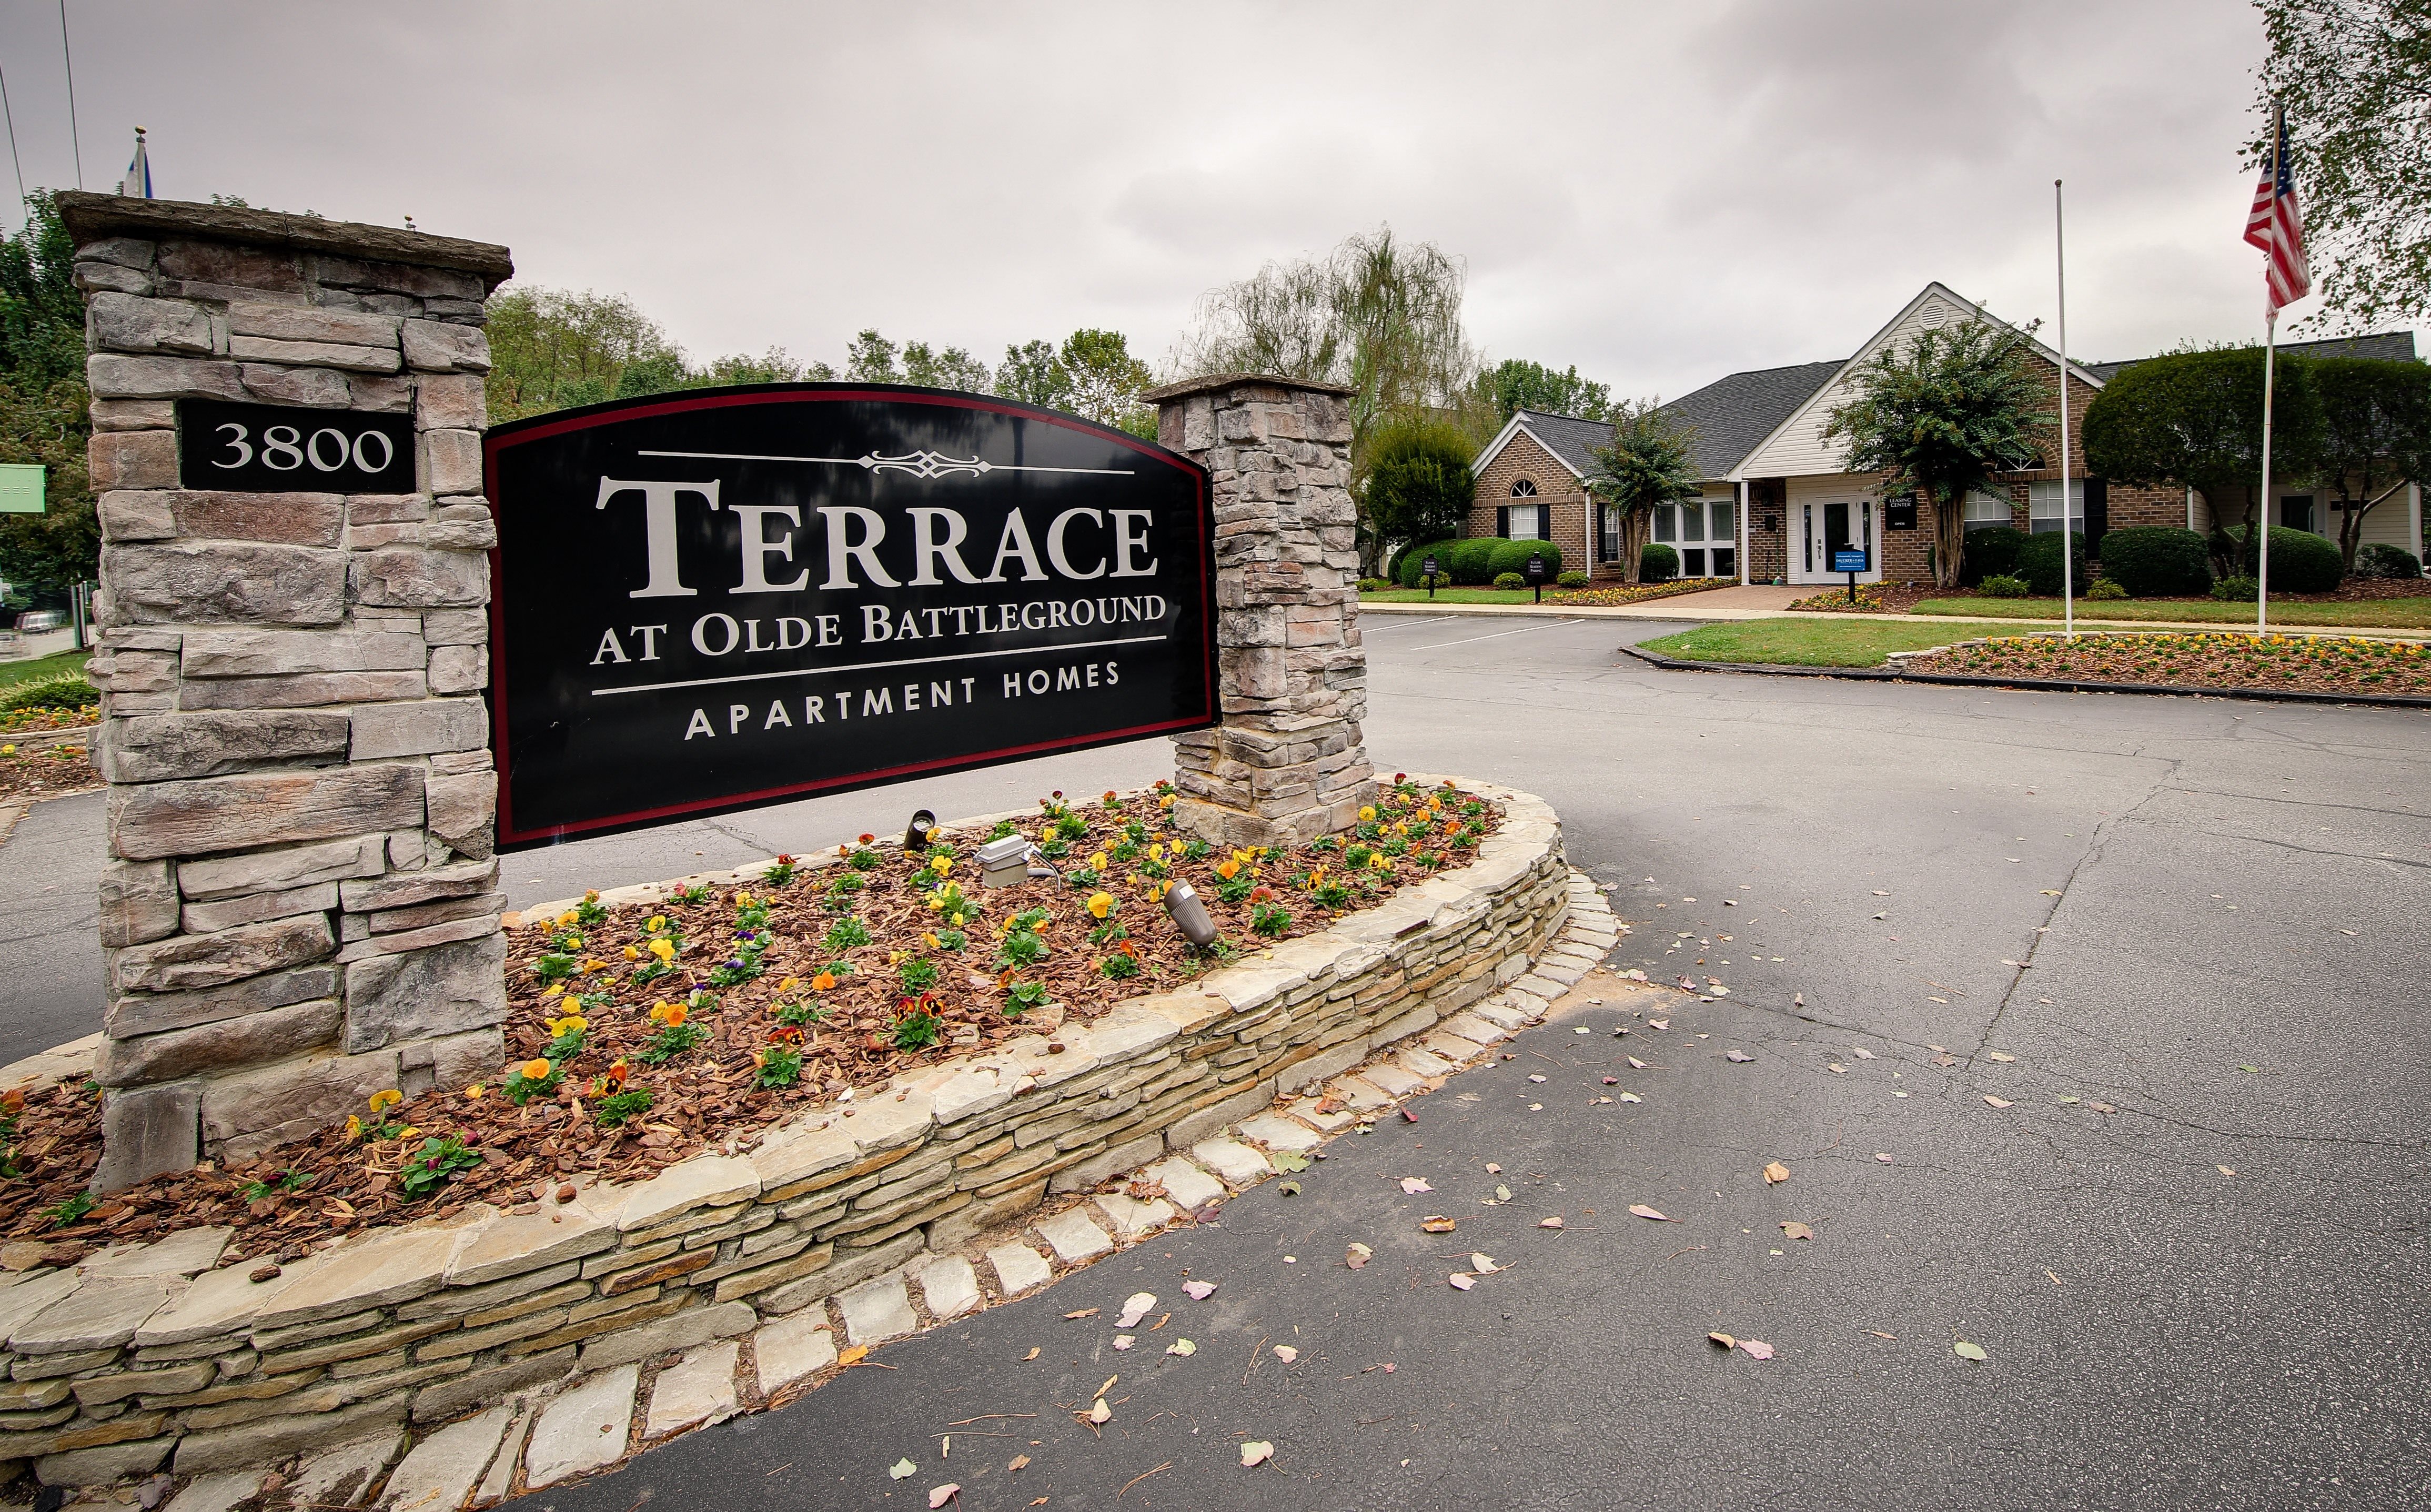 Exterior Signage at Terrace at Olde Battleground apartments in Greensboro, NC